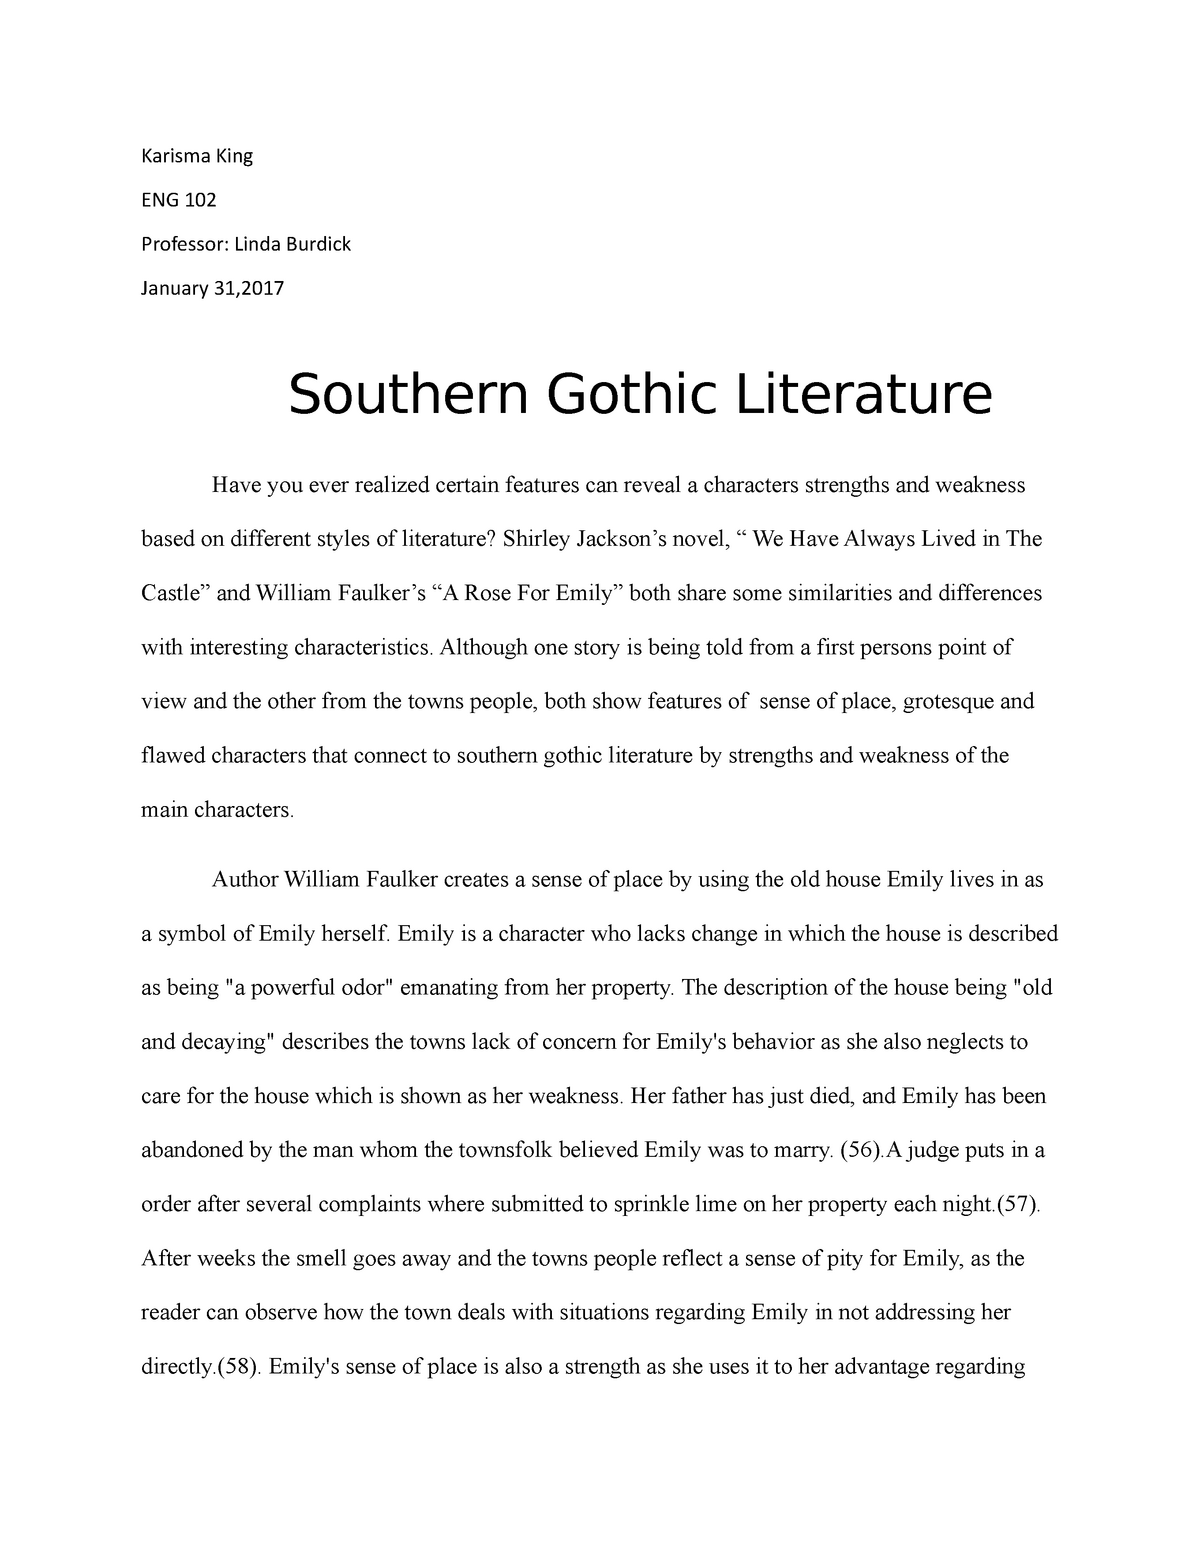 southern gothic essay